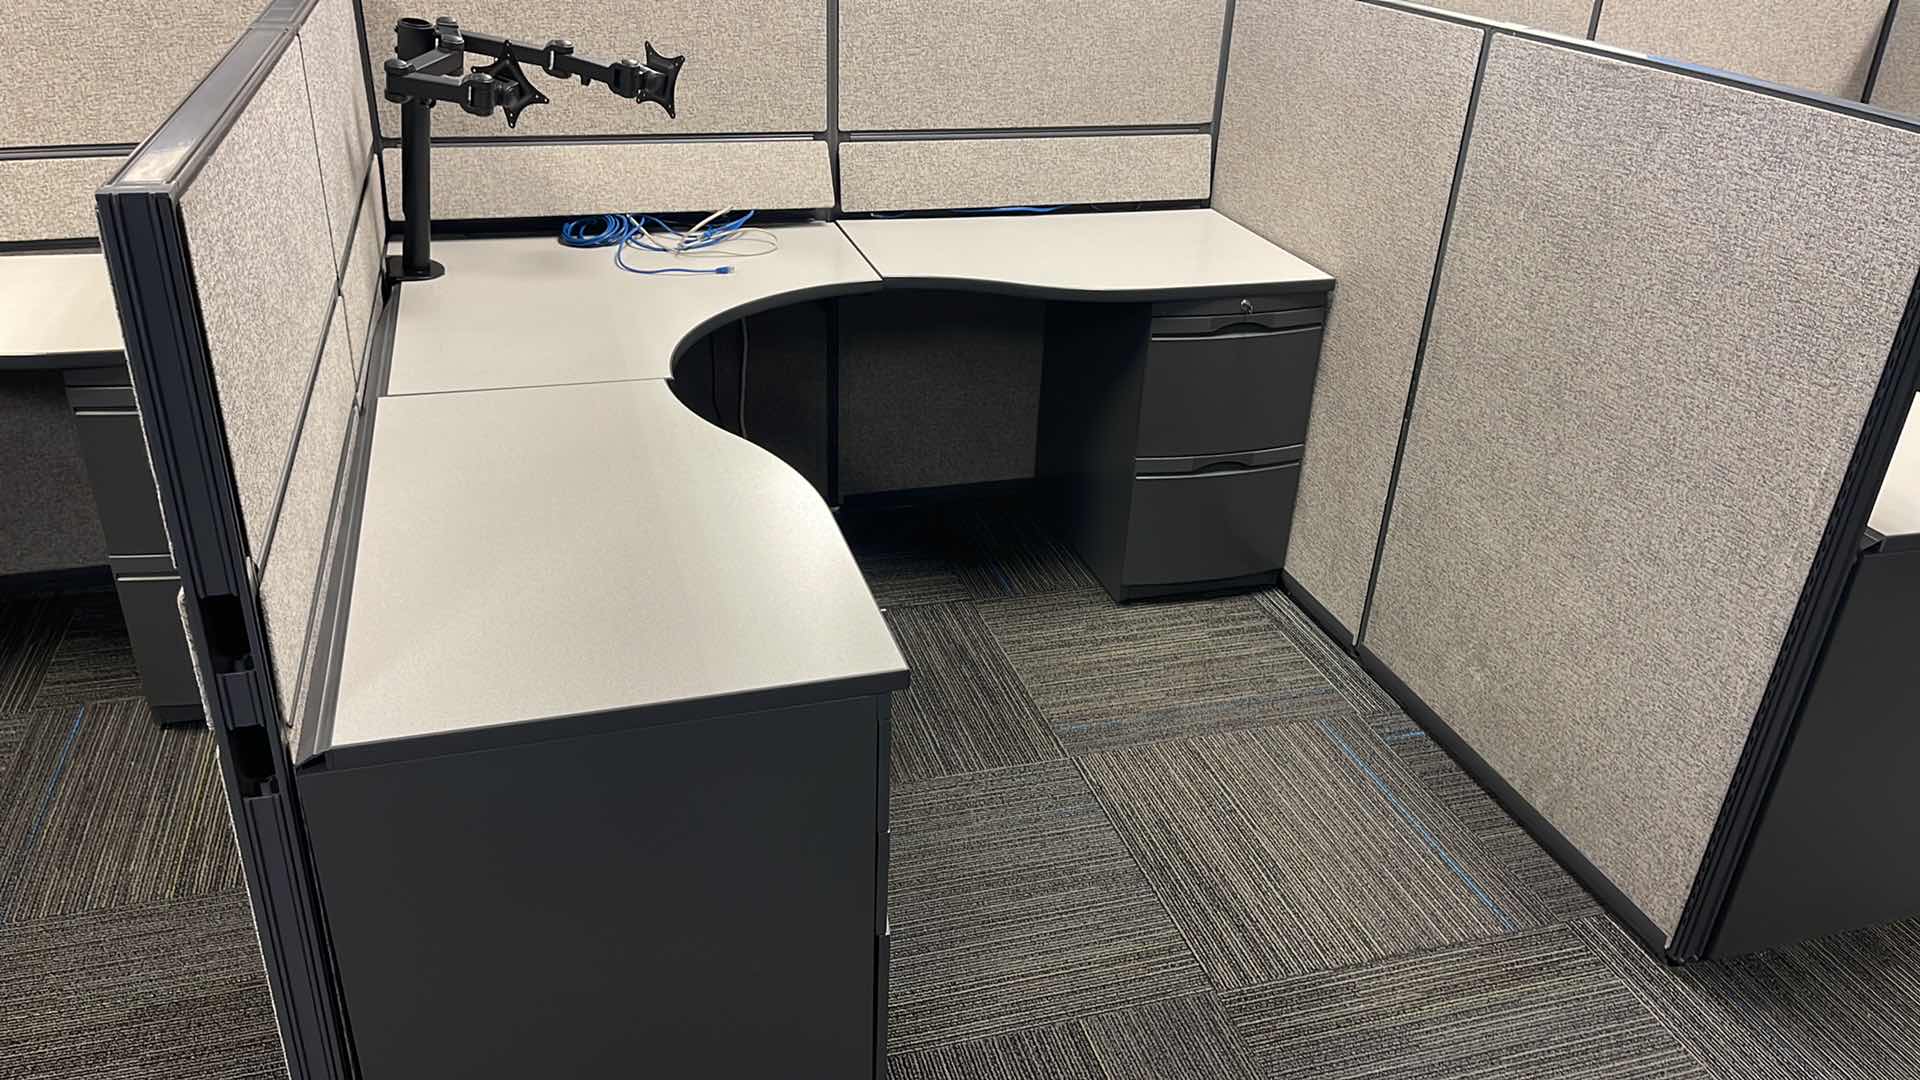 Photo 7 of 3 PC CUBICLE SET W 5 DRAWER MEDAL BASE DESKS 2 CUBICLES 76” X 76” H50” 1 CUBICLE 12’ X 76” H50”(BUYER TO DISASSEMBLE & REMOVE FROM 2ND STORY OFFICE BUILDING W ELEVATOR)